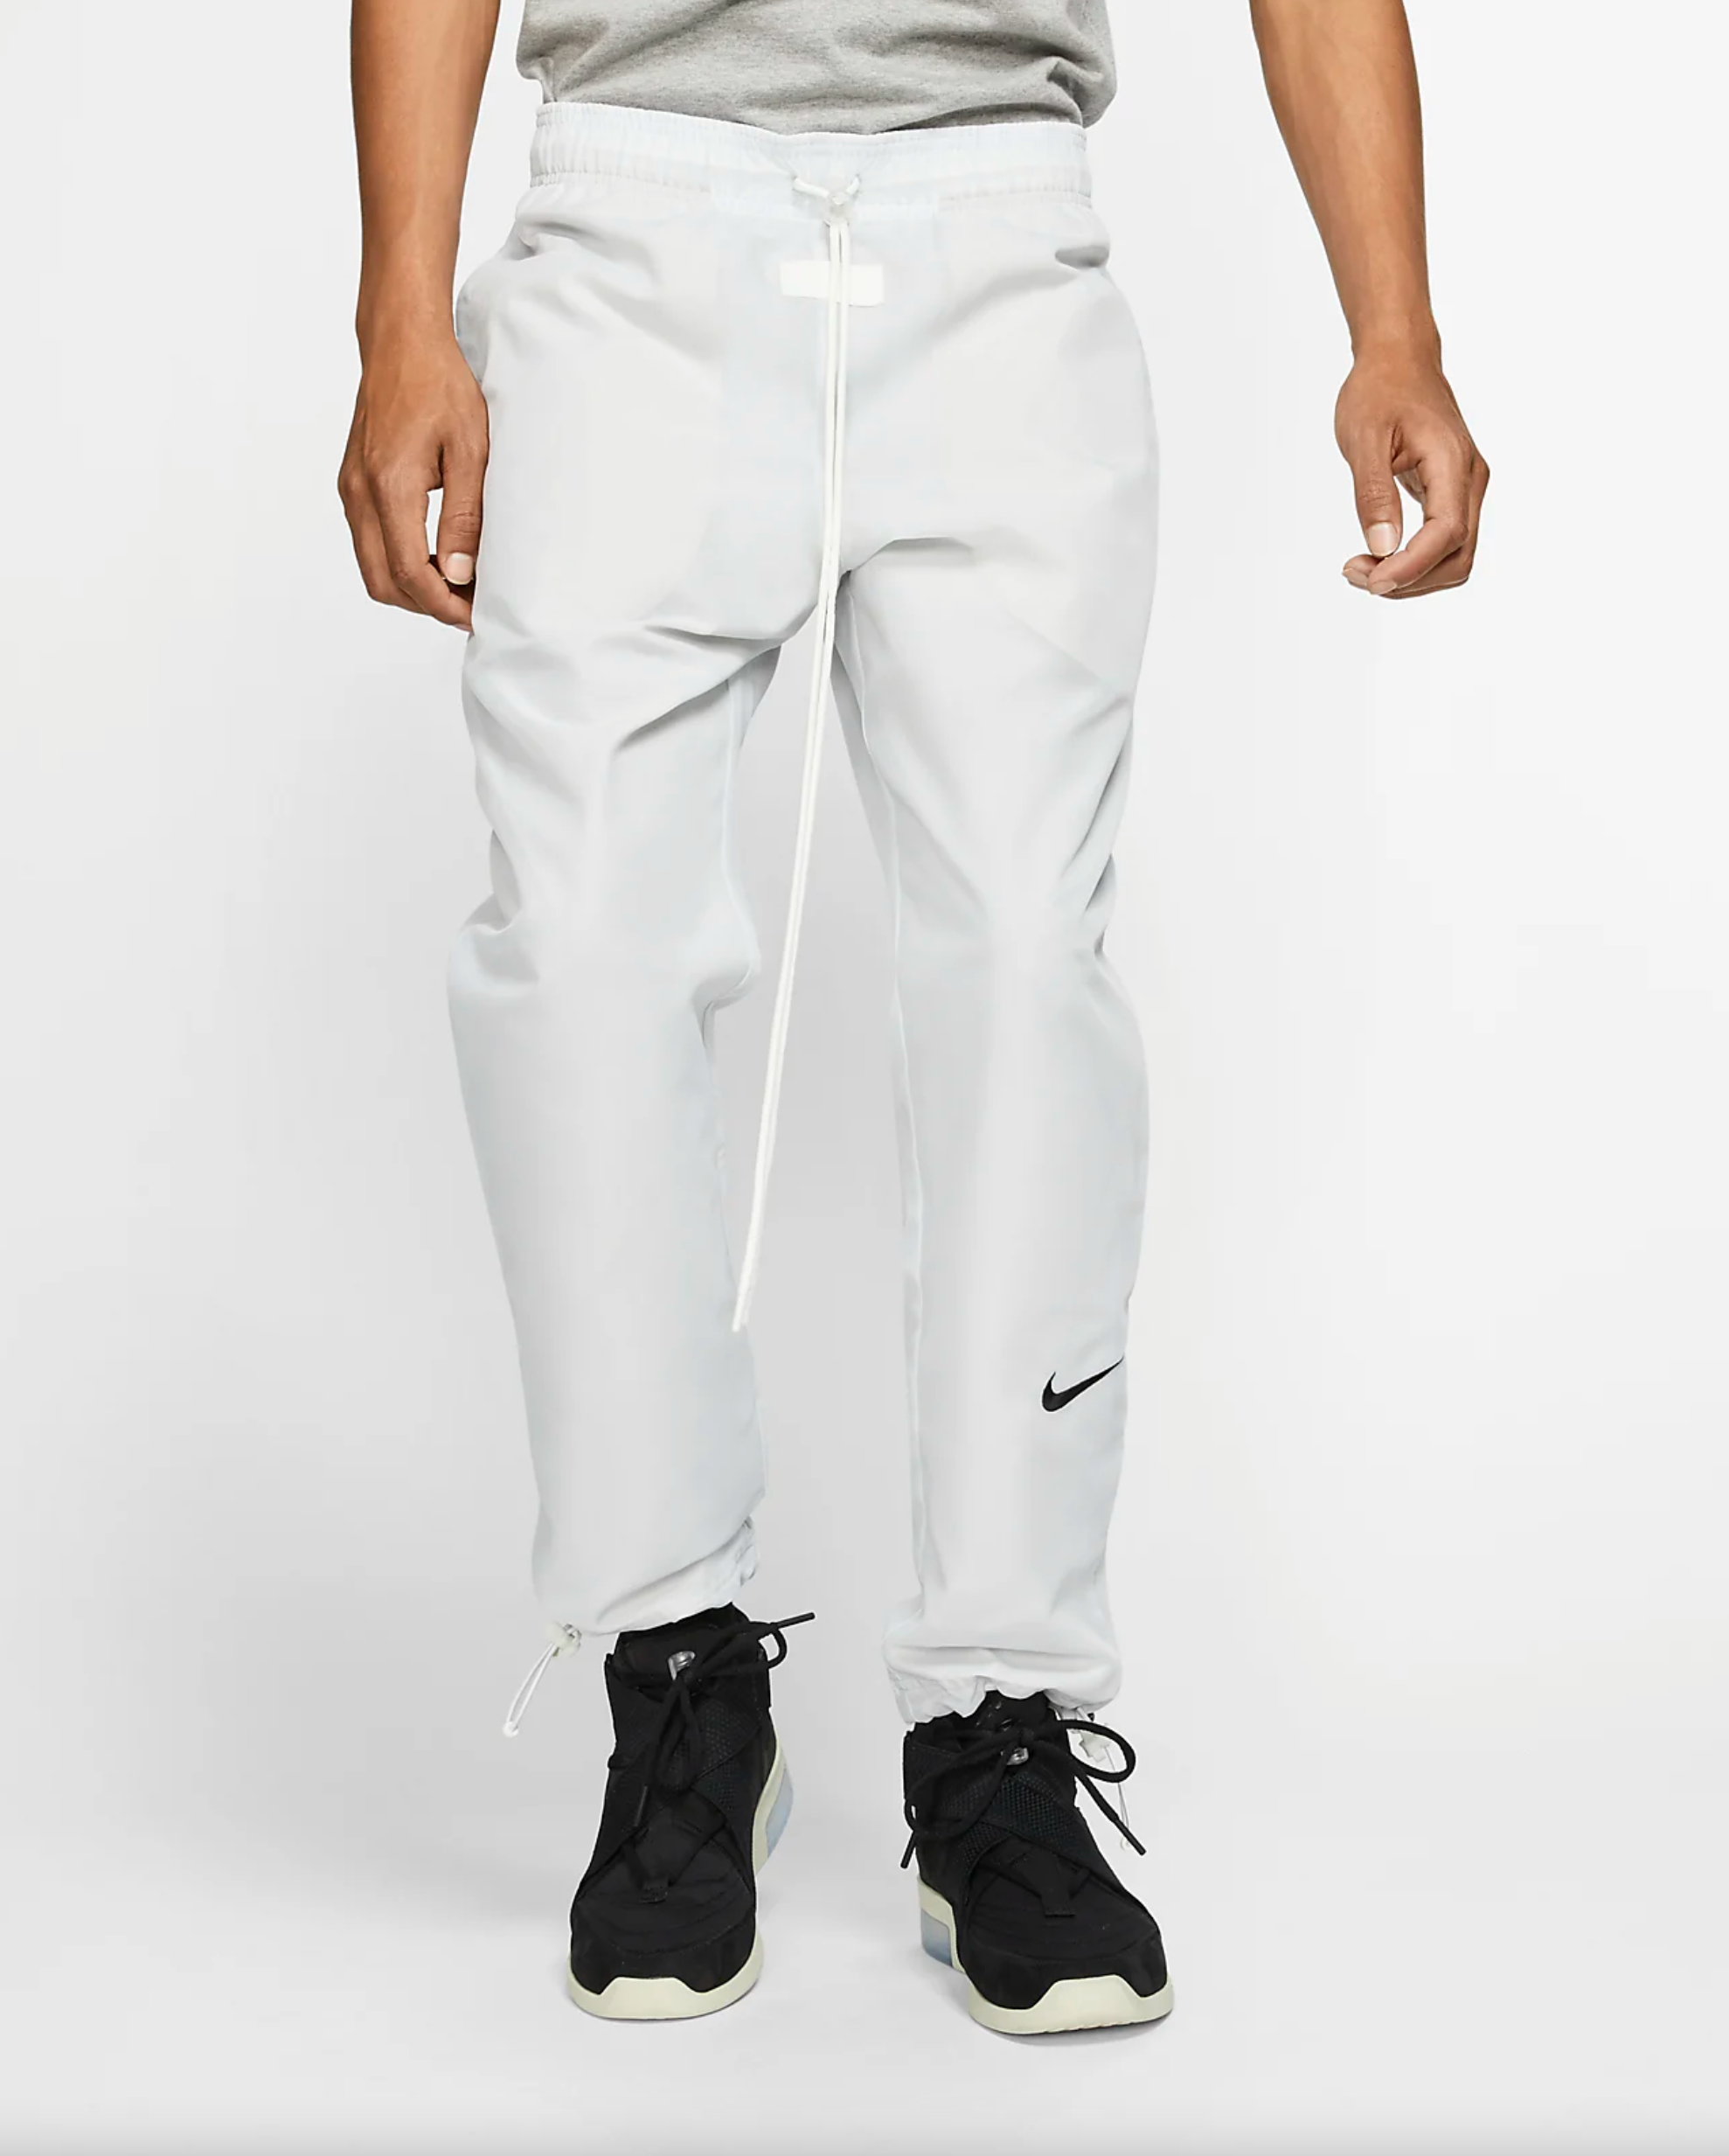 Nike X Fear Of God Woven Pant 'Pure Platinum', 46% OFF